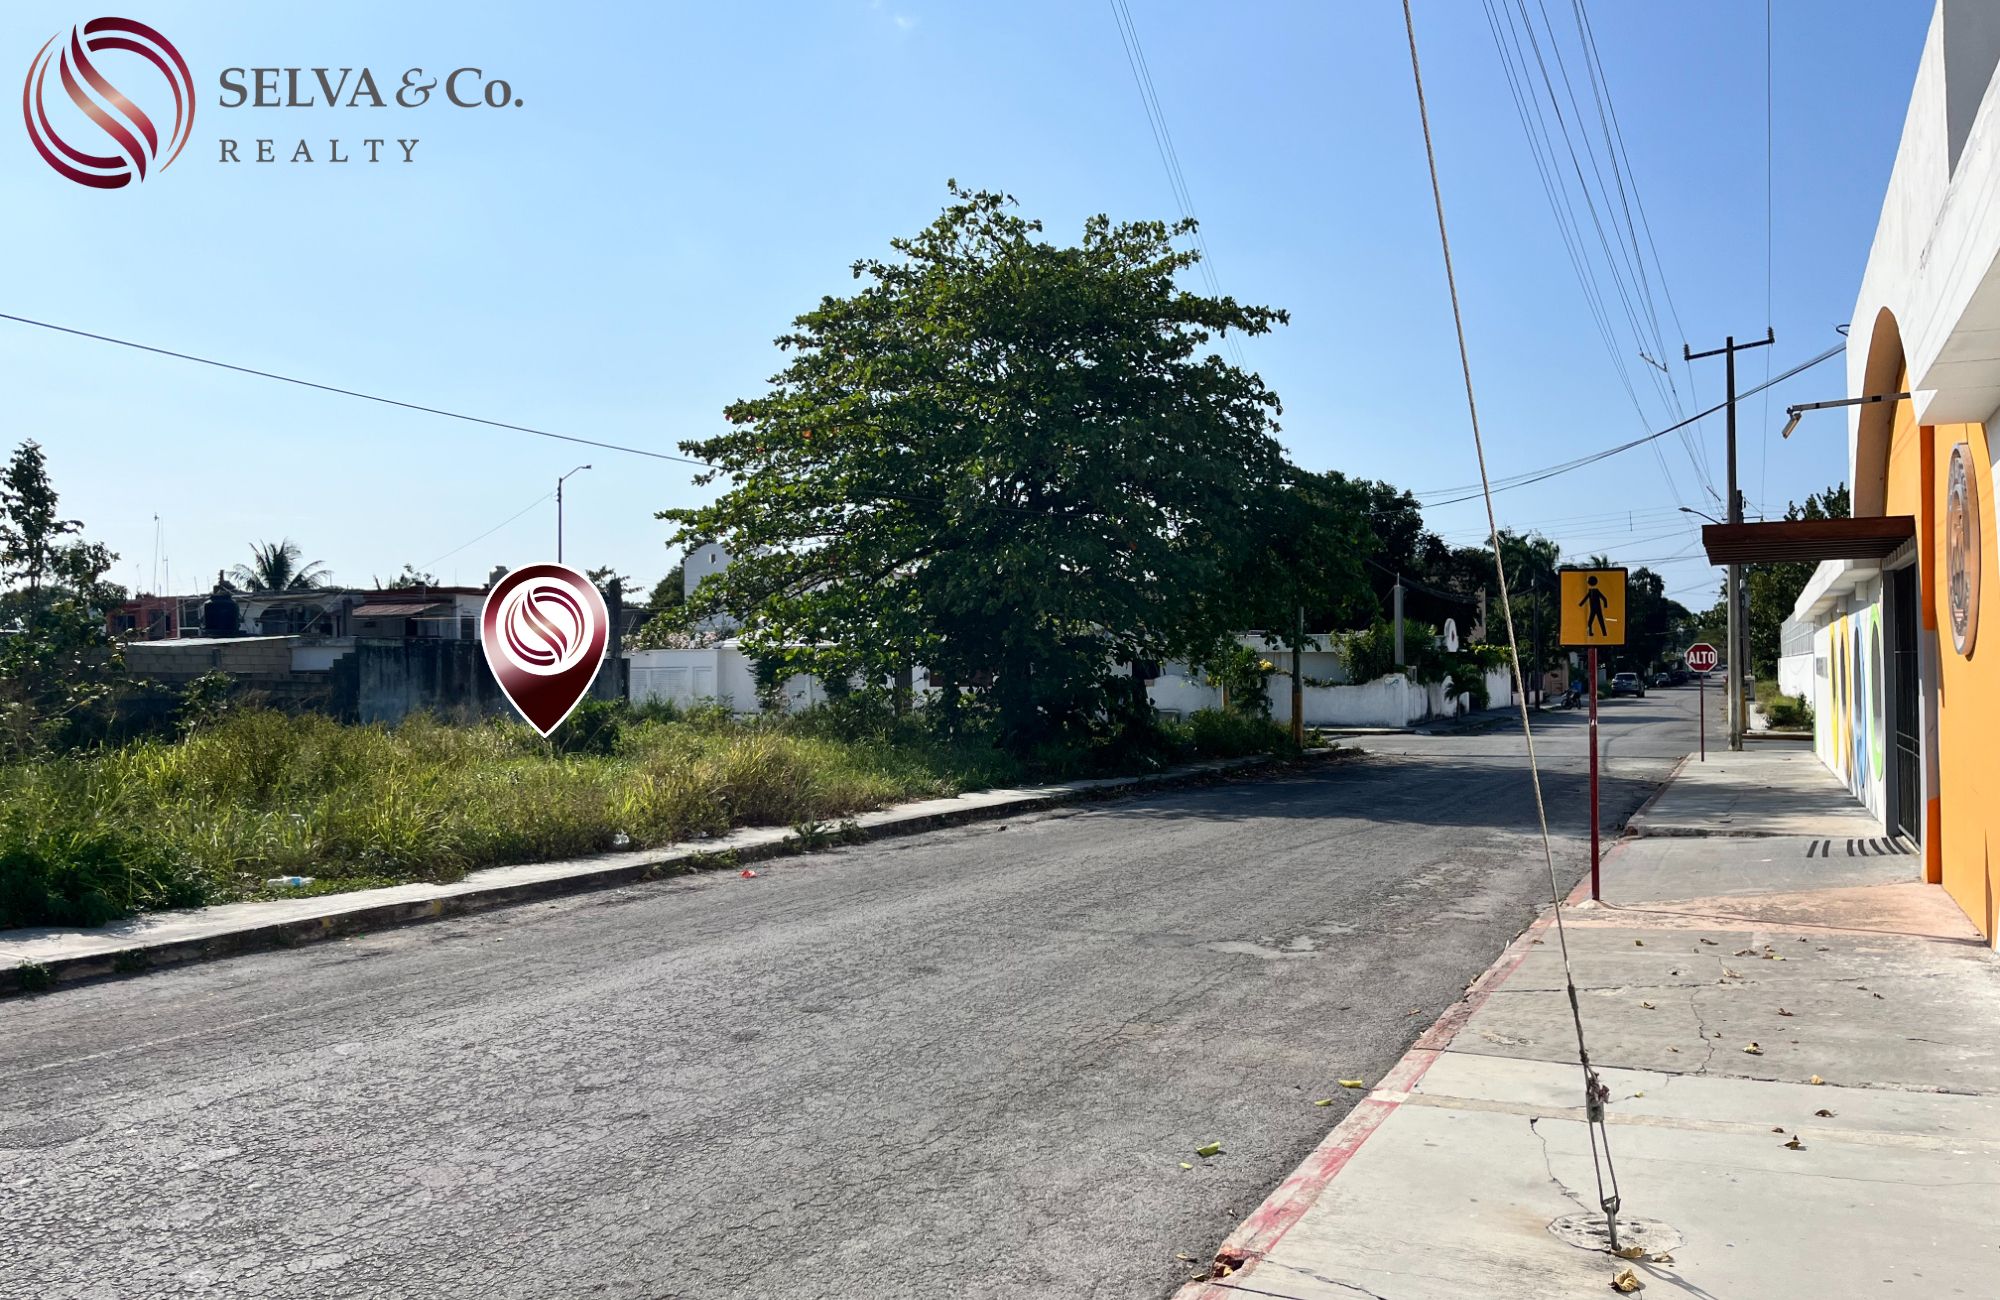 Land for sale, Investment opportunity in Cozumel, excellent location,